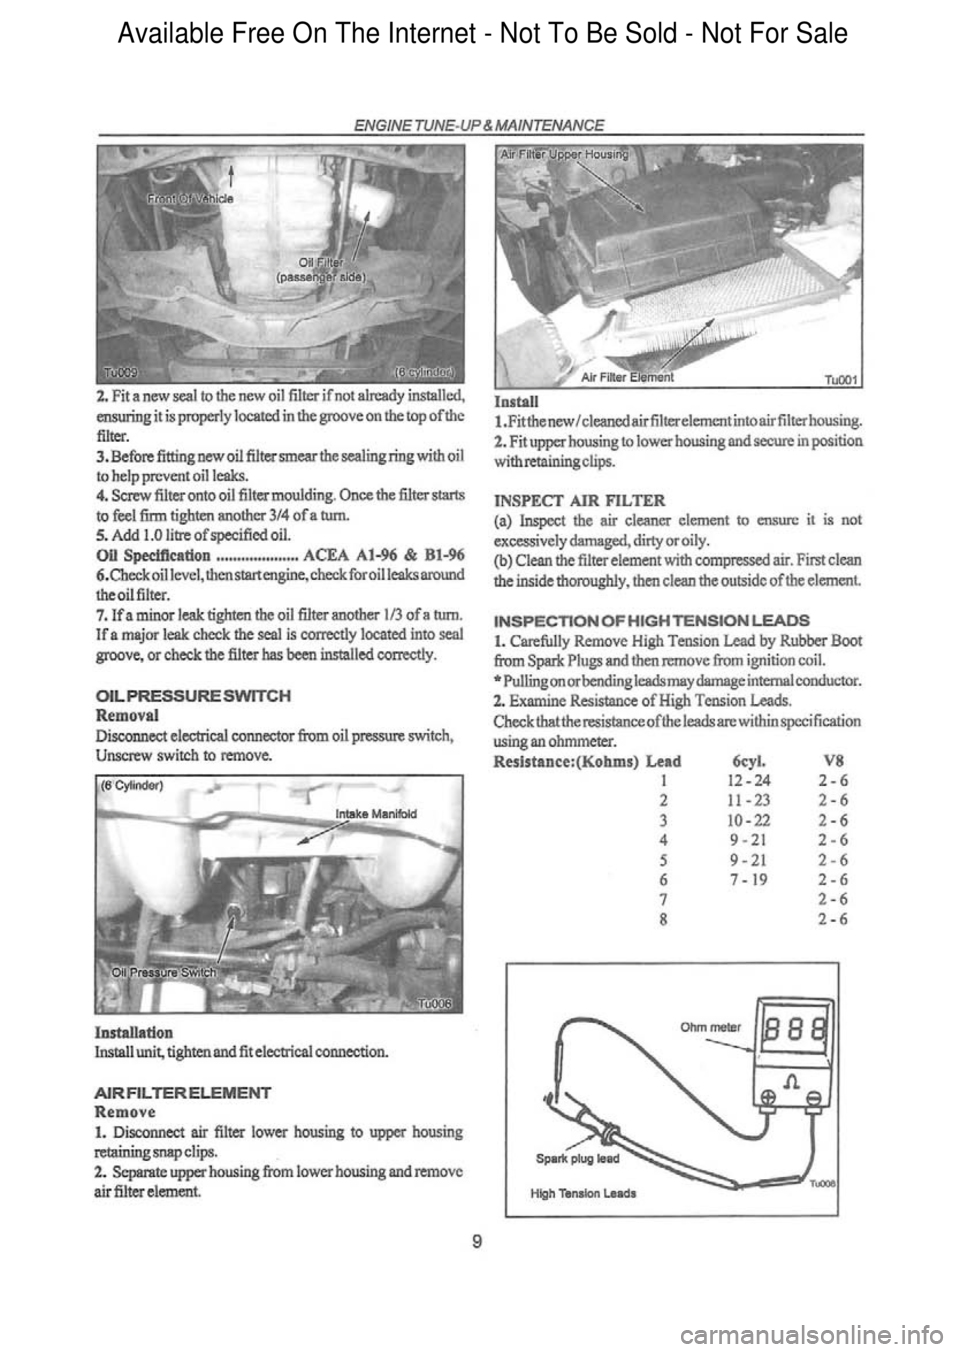 FORD FALCON 1998  Workshop Manual  Available Free On The Internet - Not To Be Sold - Not For Sale    